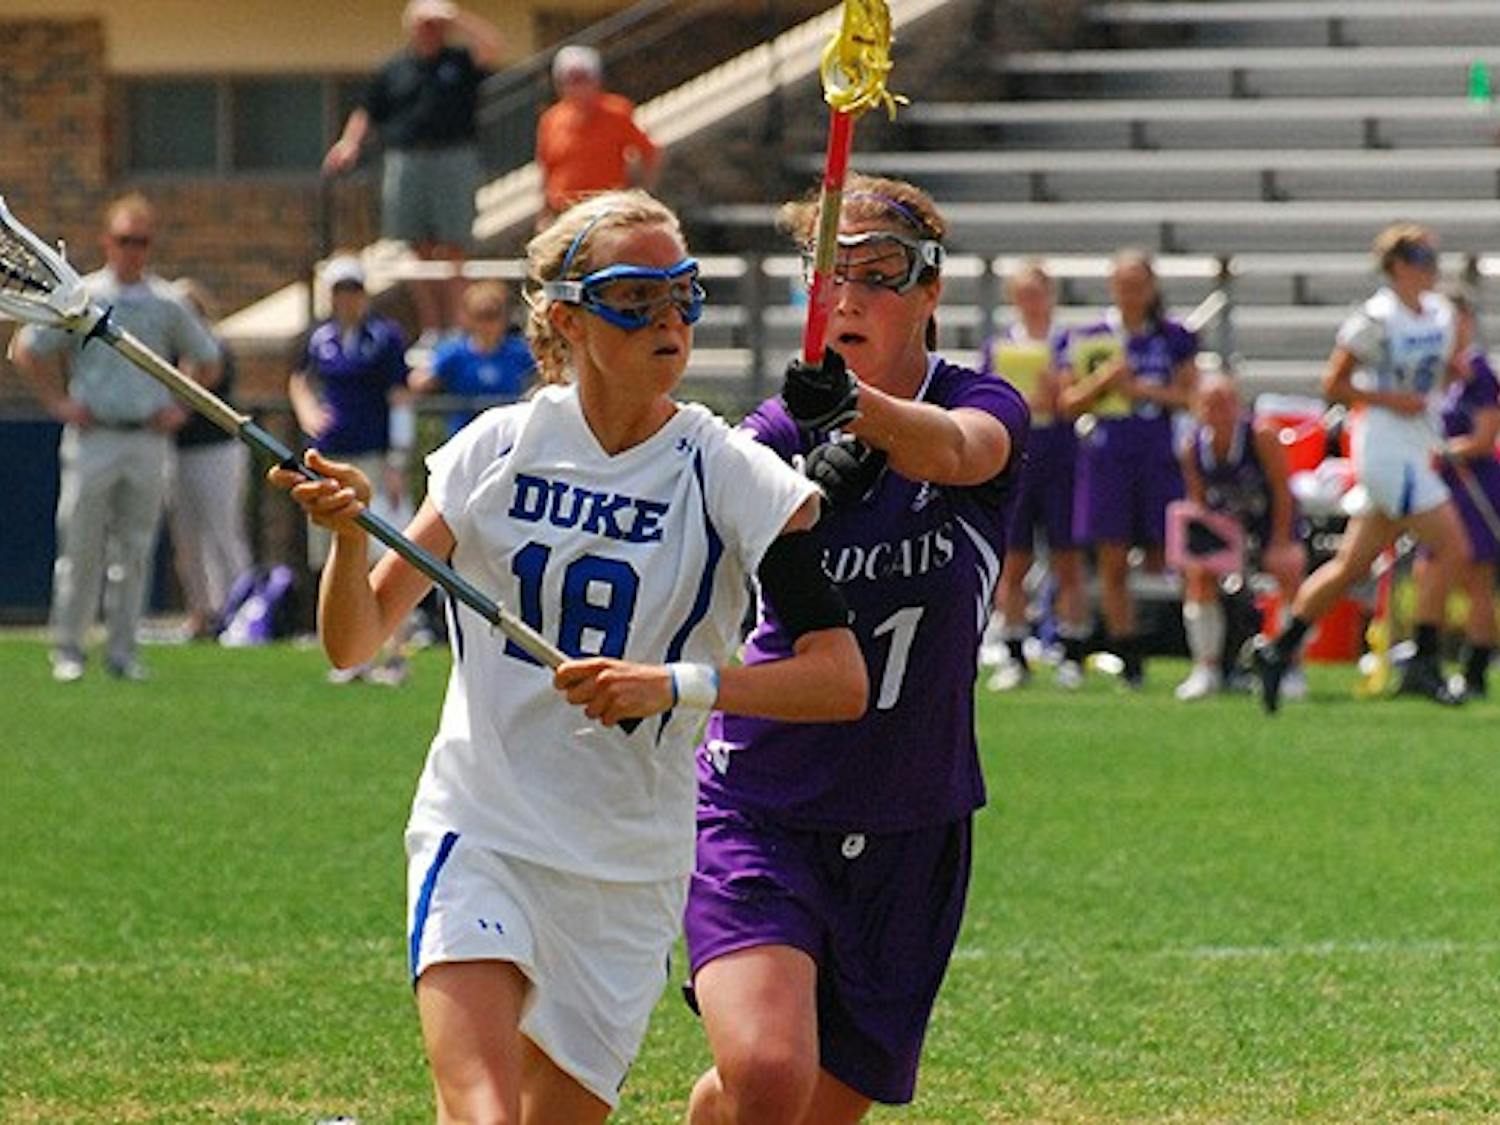 Senior Lindsay Gilbride scored four goals and added two assists for Duke, but it wasn’t enough as No. 1 Northwestern’s offense overwhelmed the Blue Devils, 19-14.